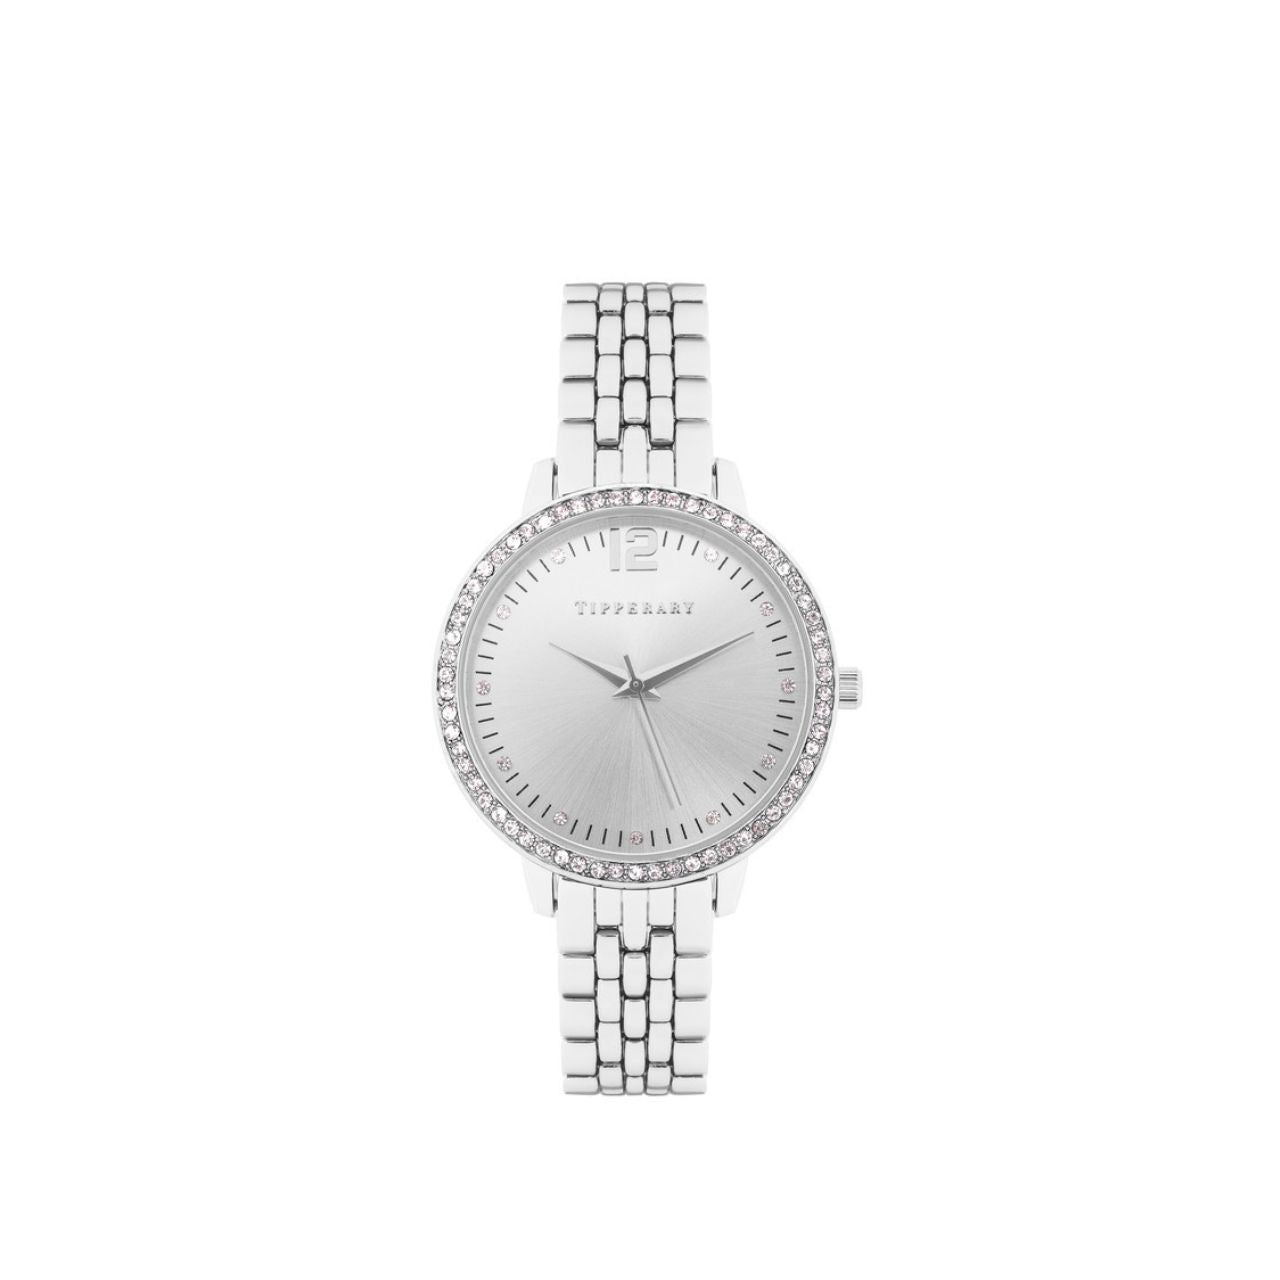 Ladies Navona Silver Watch by Tipperary  Introducing the "NAVONA SILVER WATCH" from Tipperary Crystal, a brand celebrated for its high-quality jewellery, homeware, handbags, and gifts. This elegant watch is part of our esteemed Jewellery collection and stands as a testament to our commitment to timeless design and superior craftsmanship.